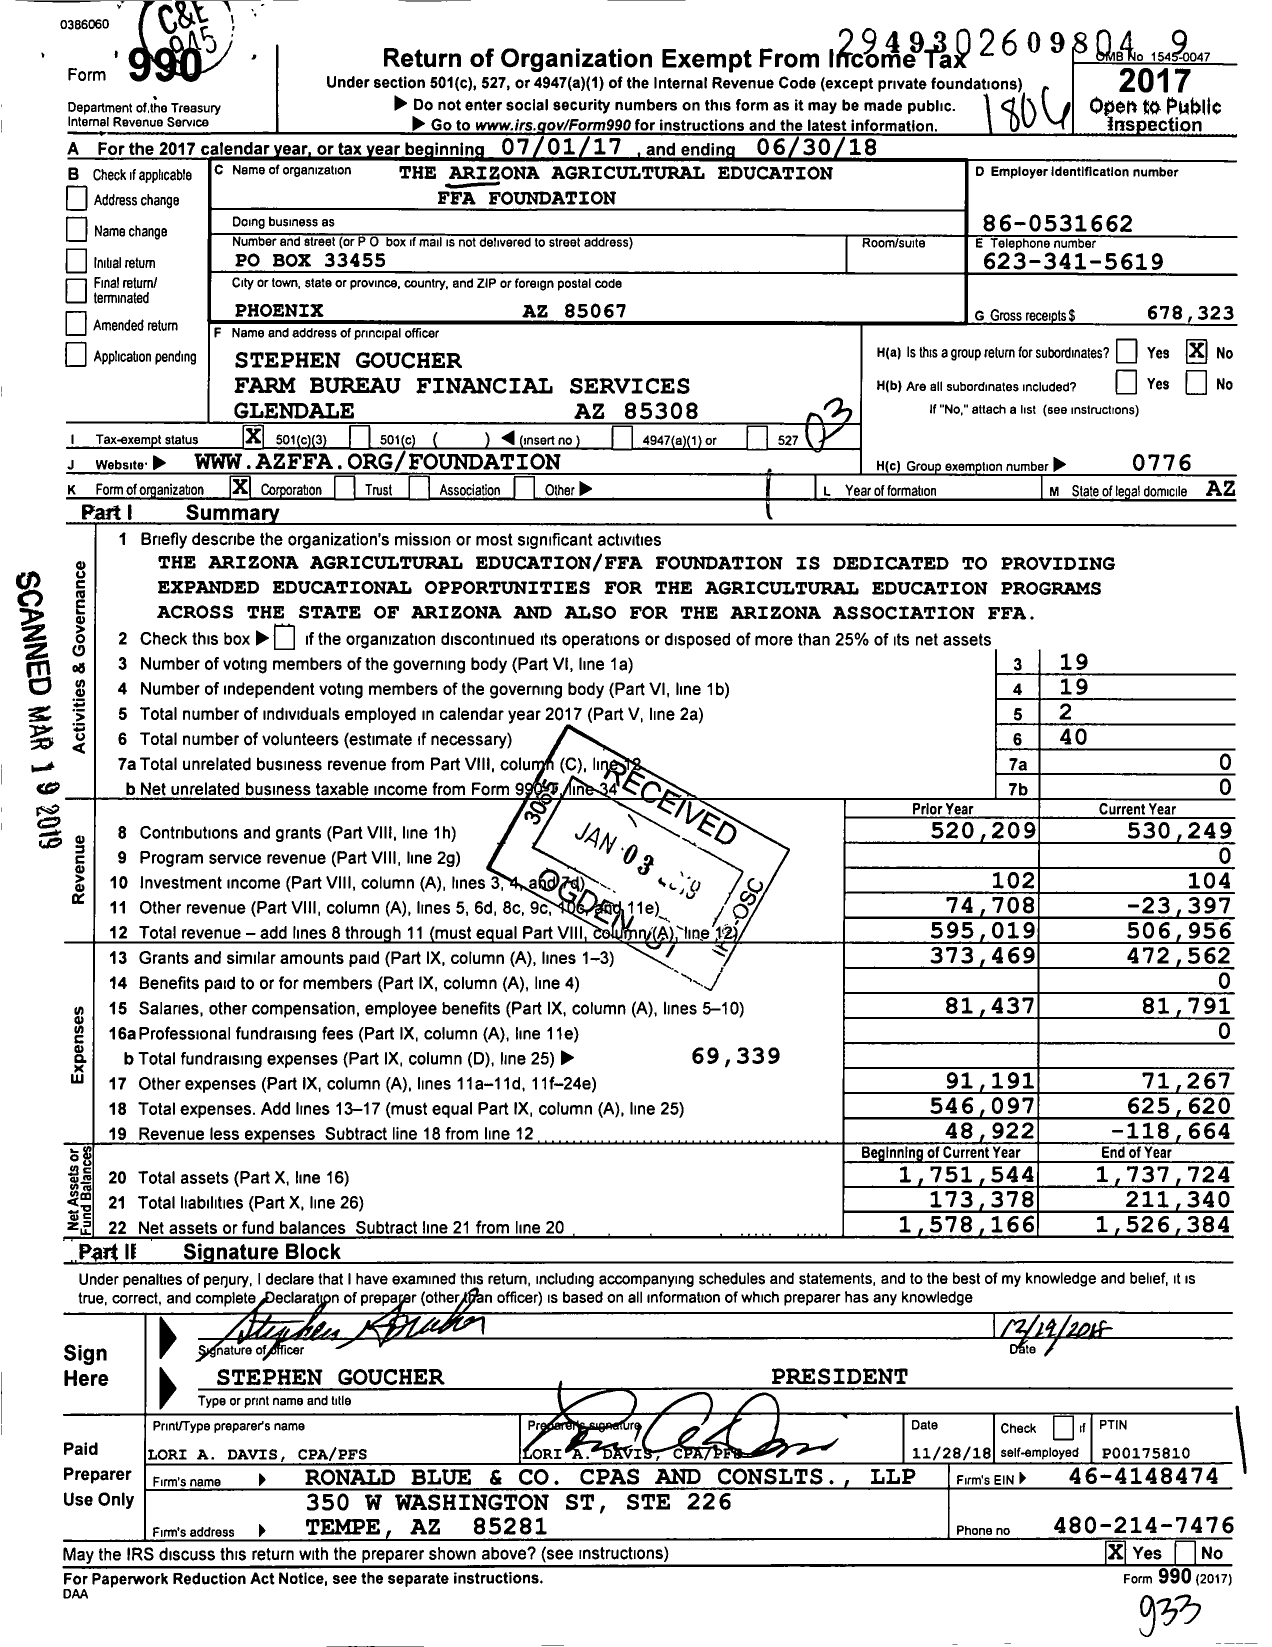 Image of first page of 2017 Form 990 for The Arizona Agricultural Education Ffa Foundation